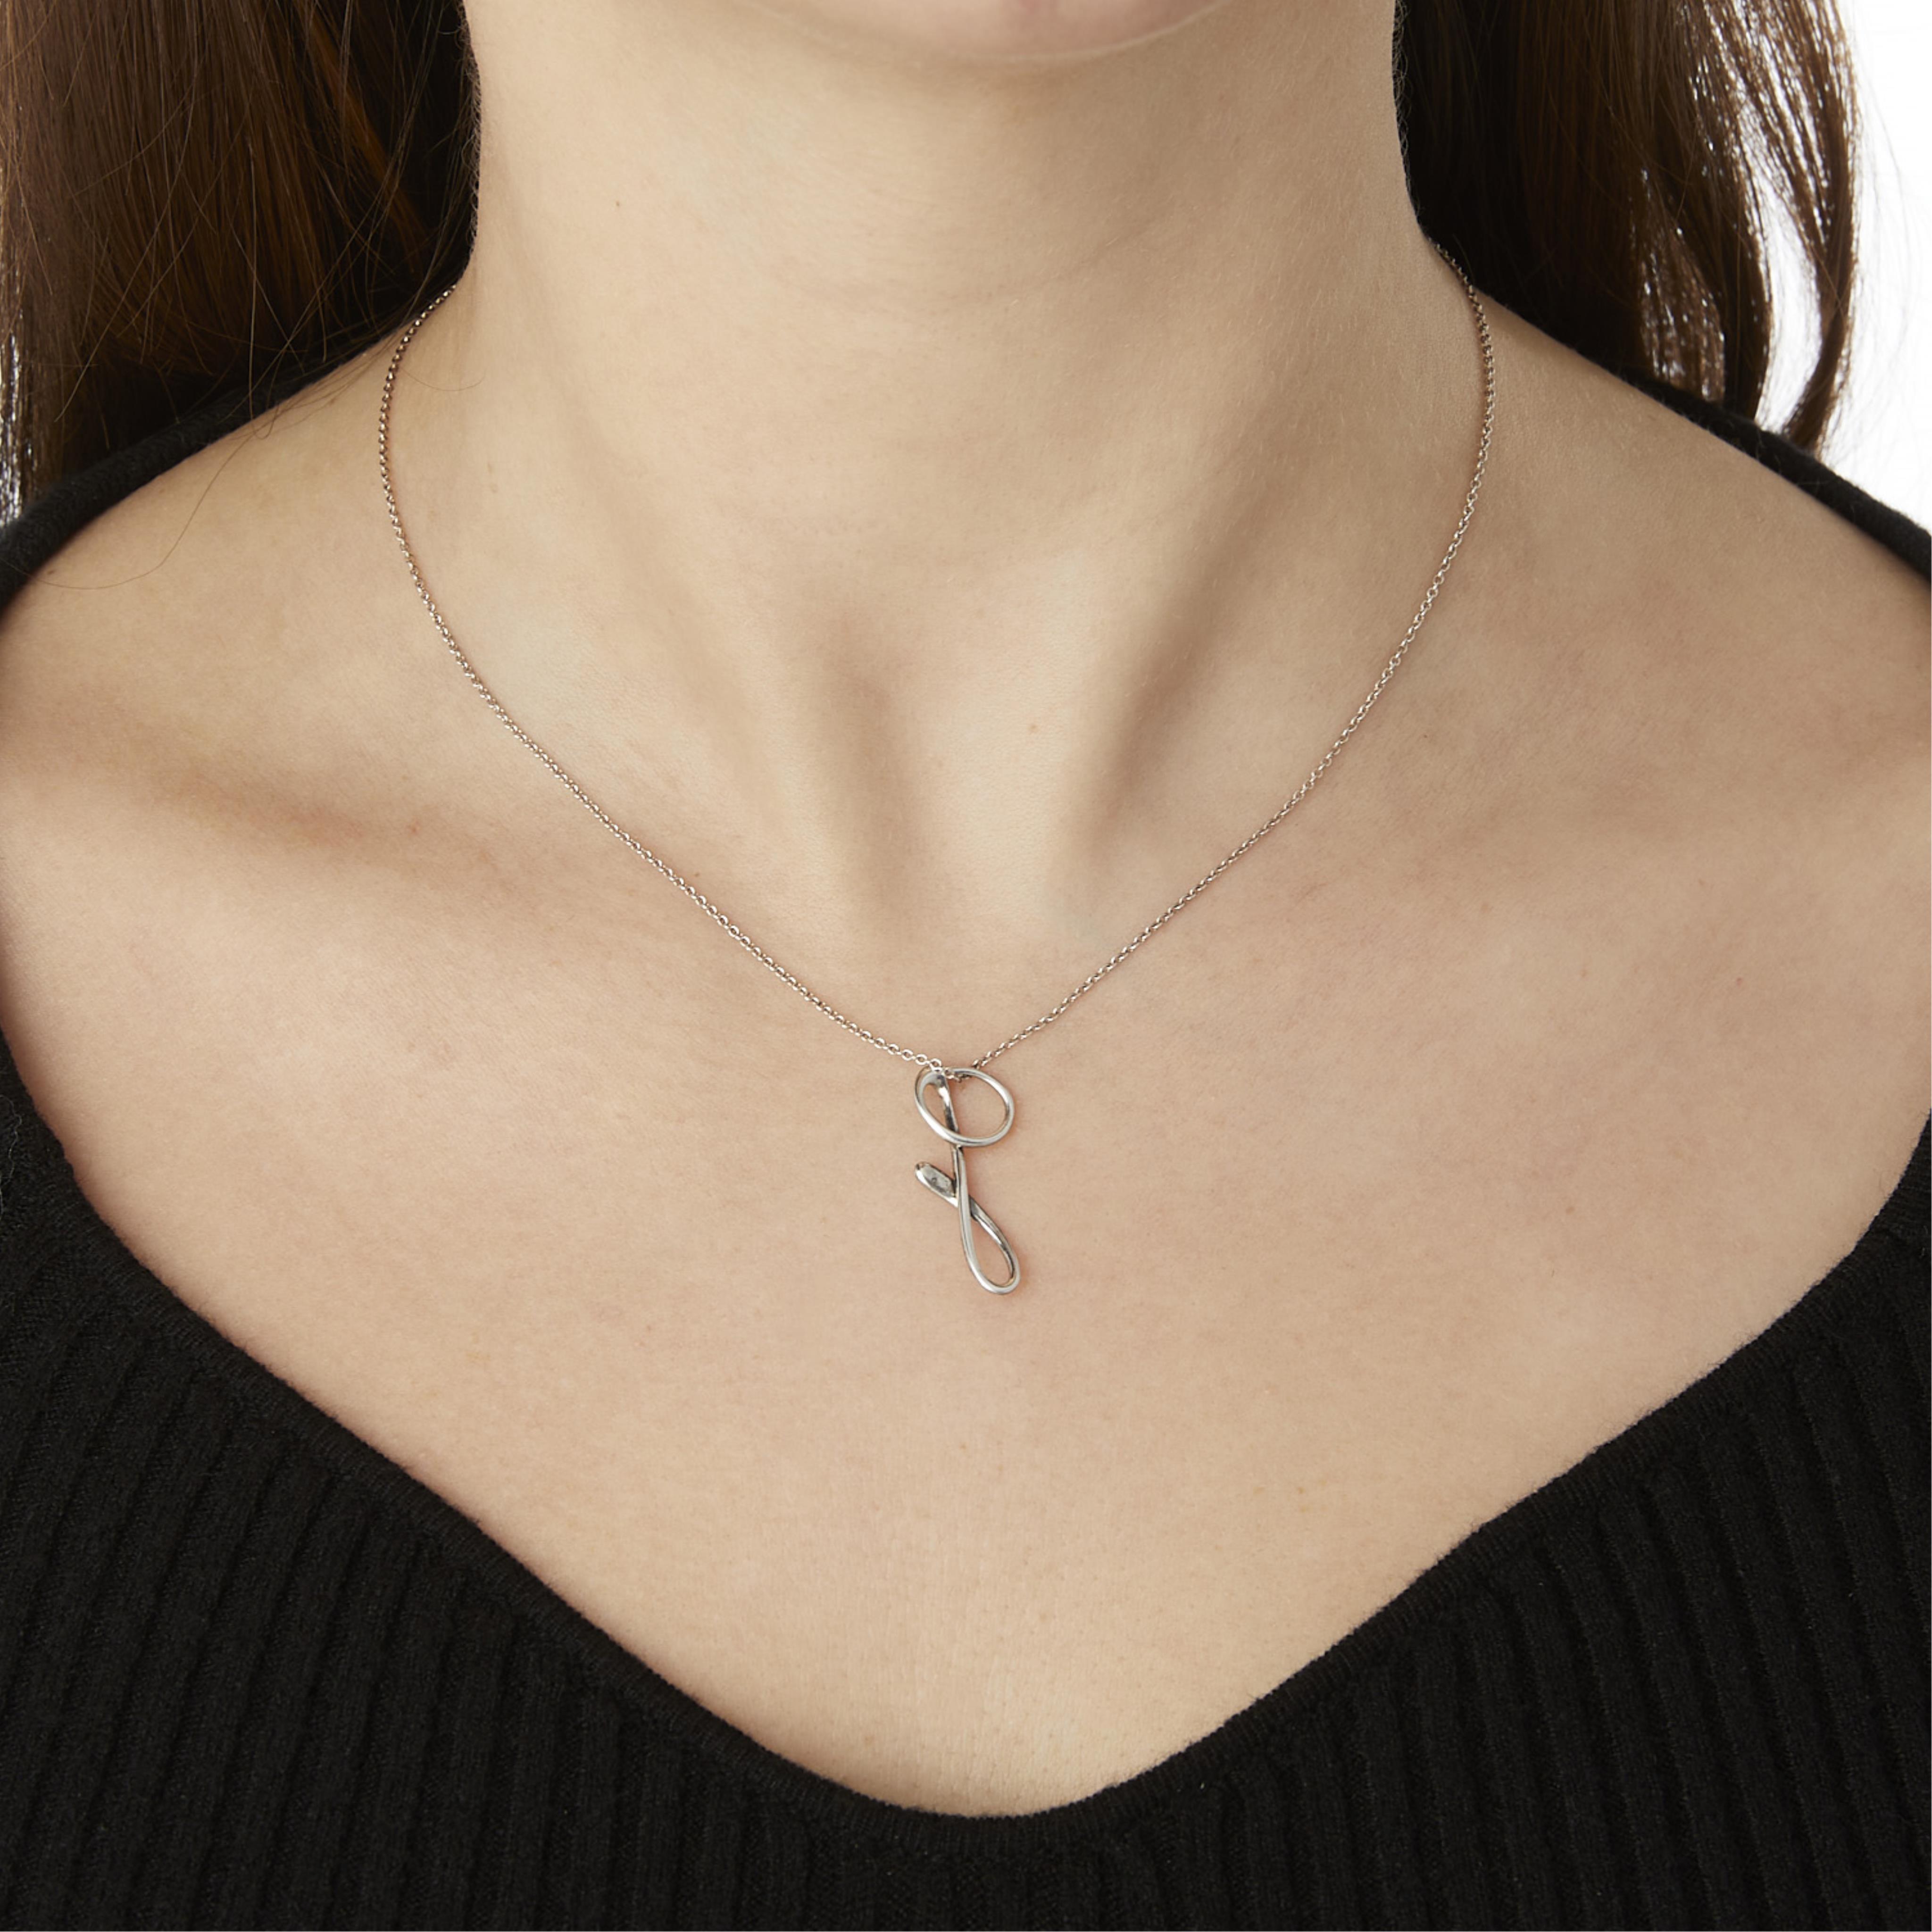 Elsa Peretti for Tiffany & Co. Sterling Initial Necklace - Image 2 of 8